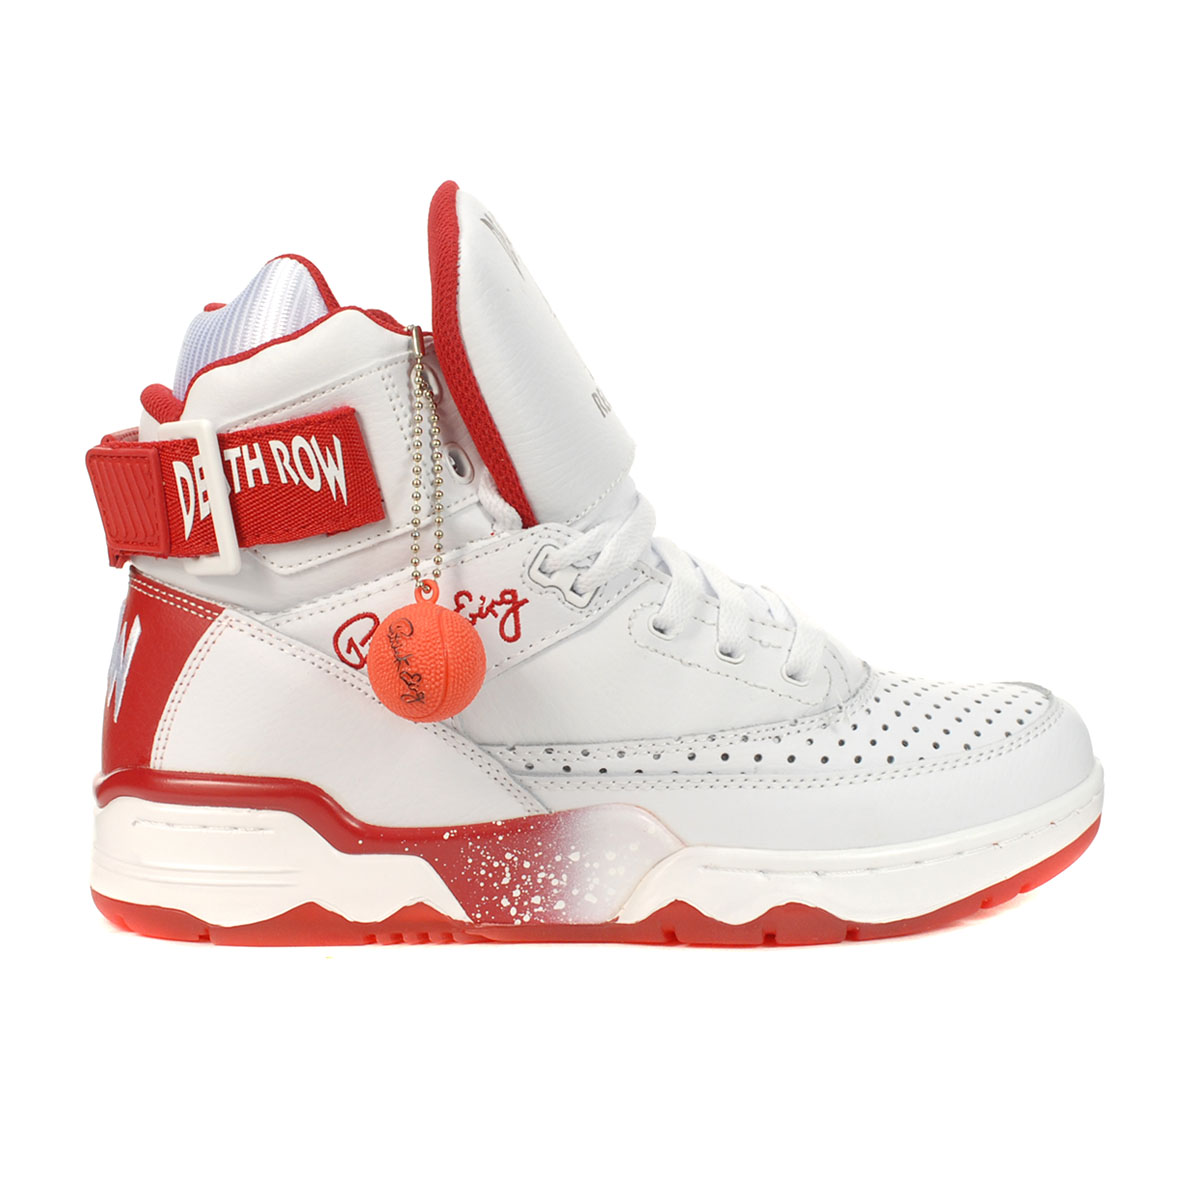 Ewing Athletics 33 HI x Death Row Records White/Red Patrick Ewing  Basketball Shoes 